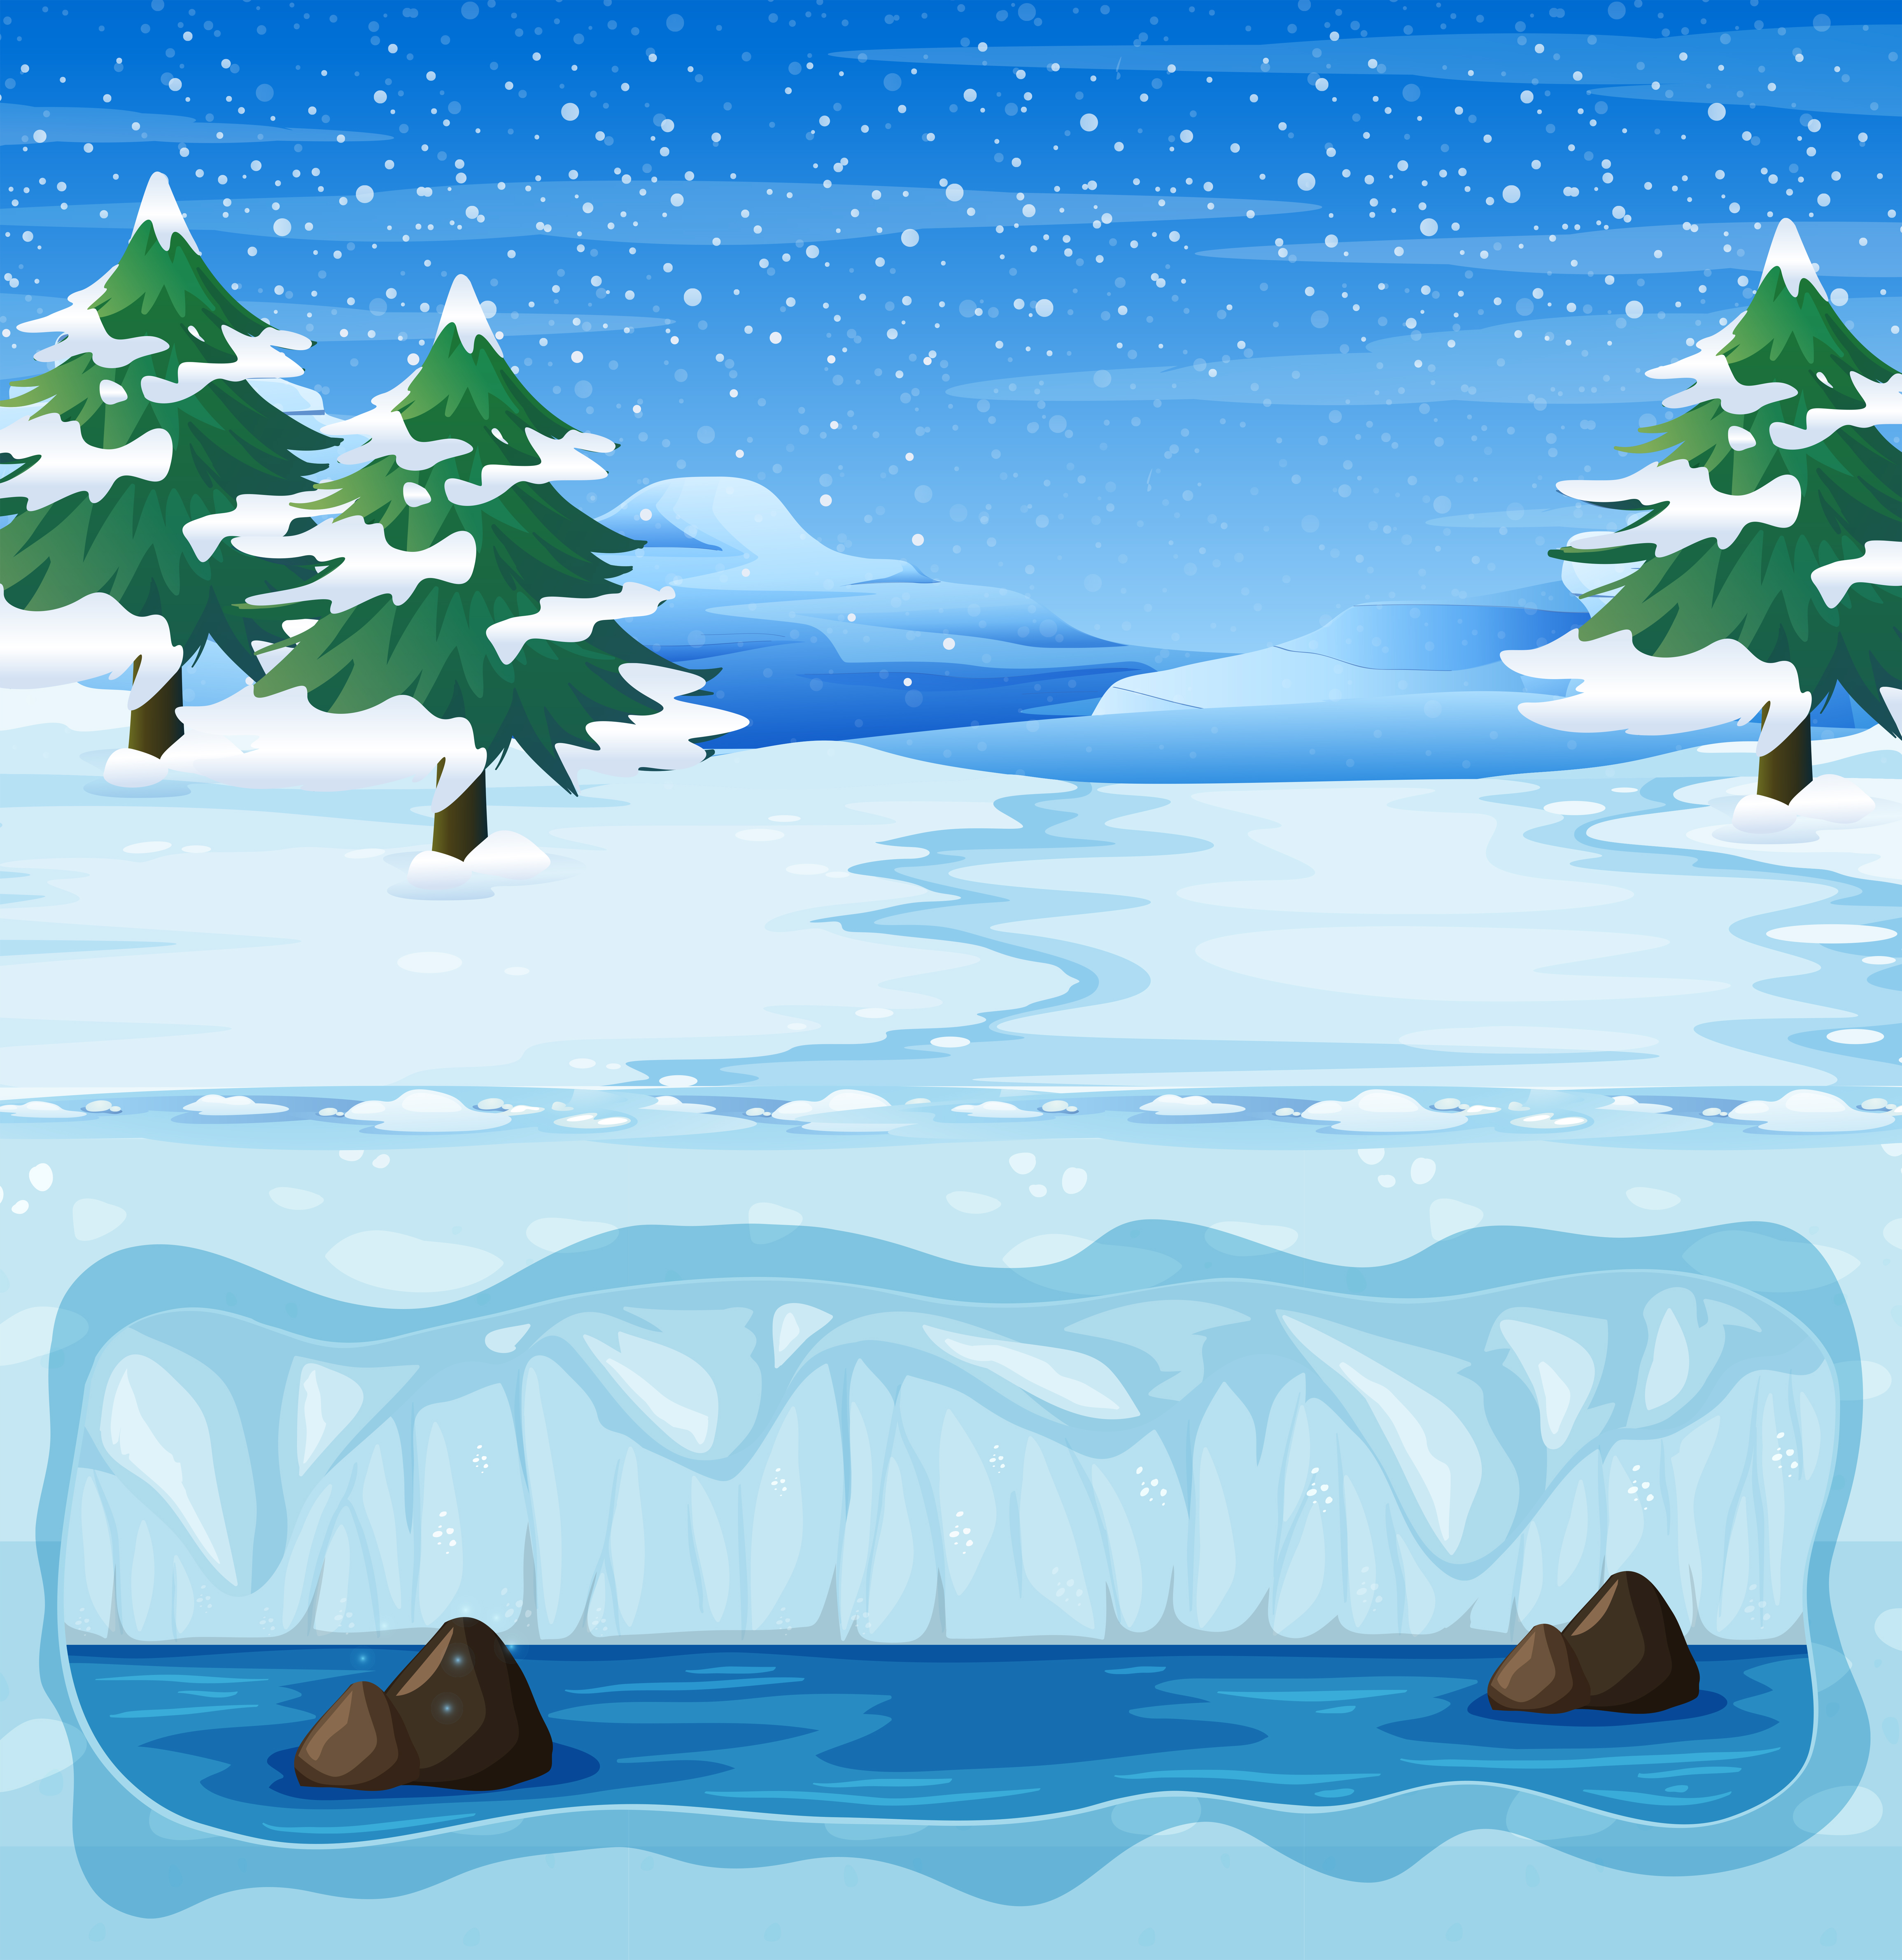 Download A snow winter landscape and underground 362887 - Download Free Vectors, Clipart Graphics ...